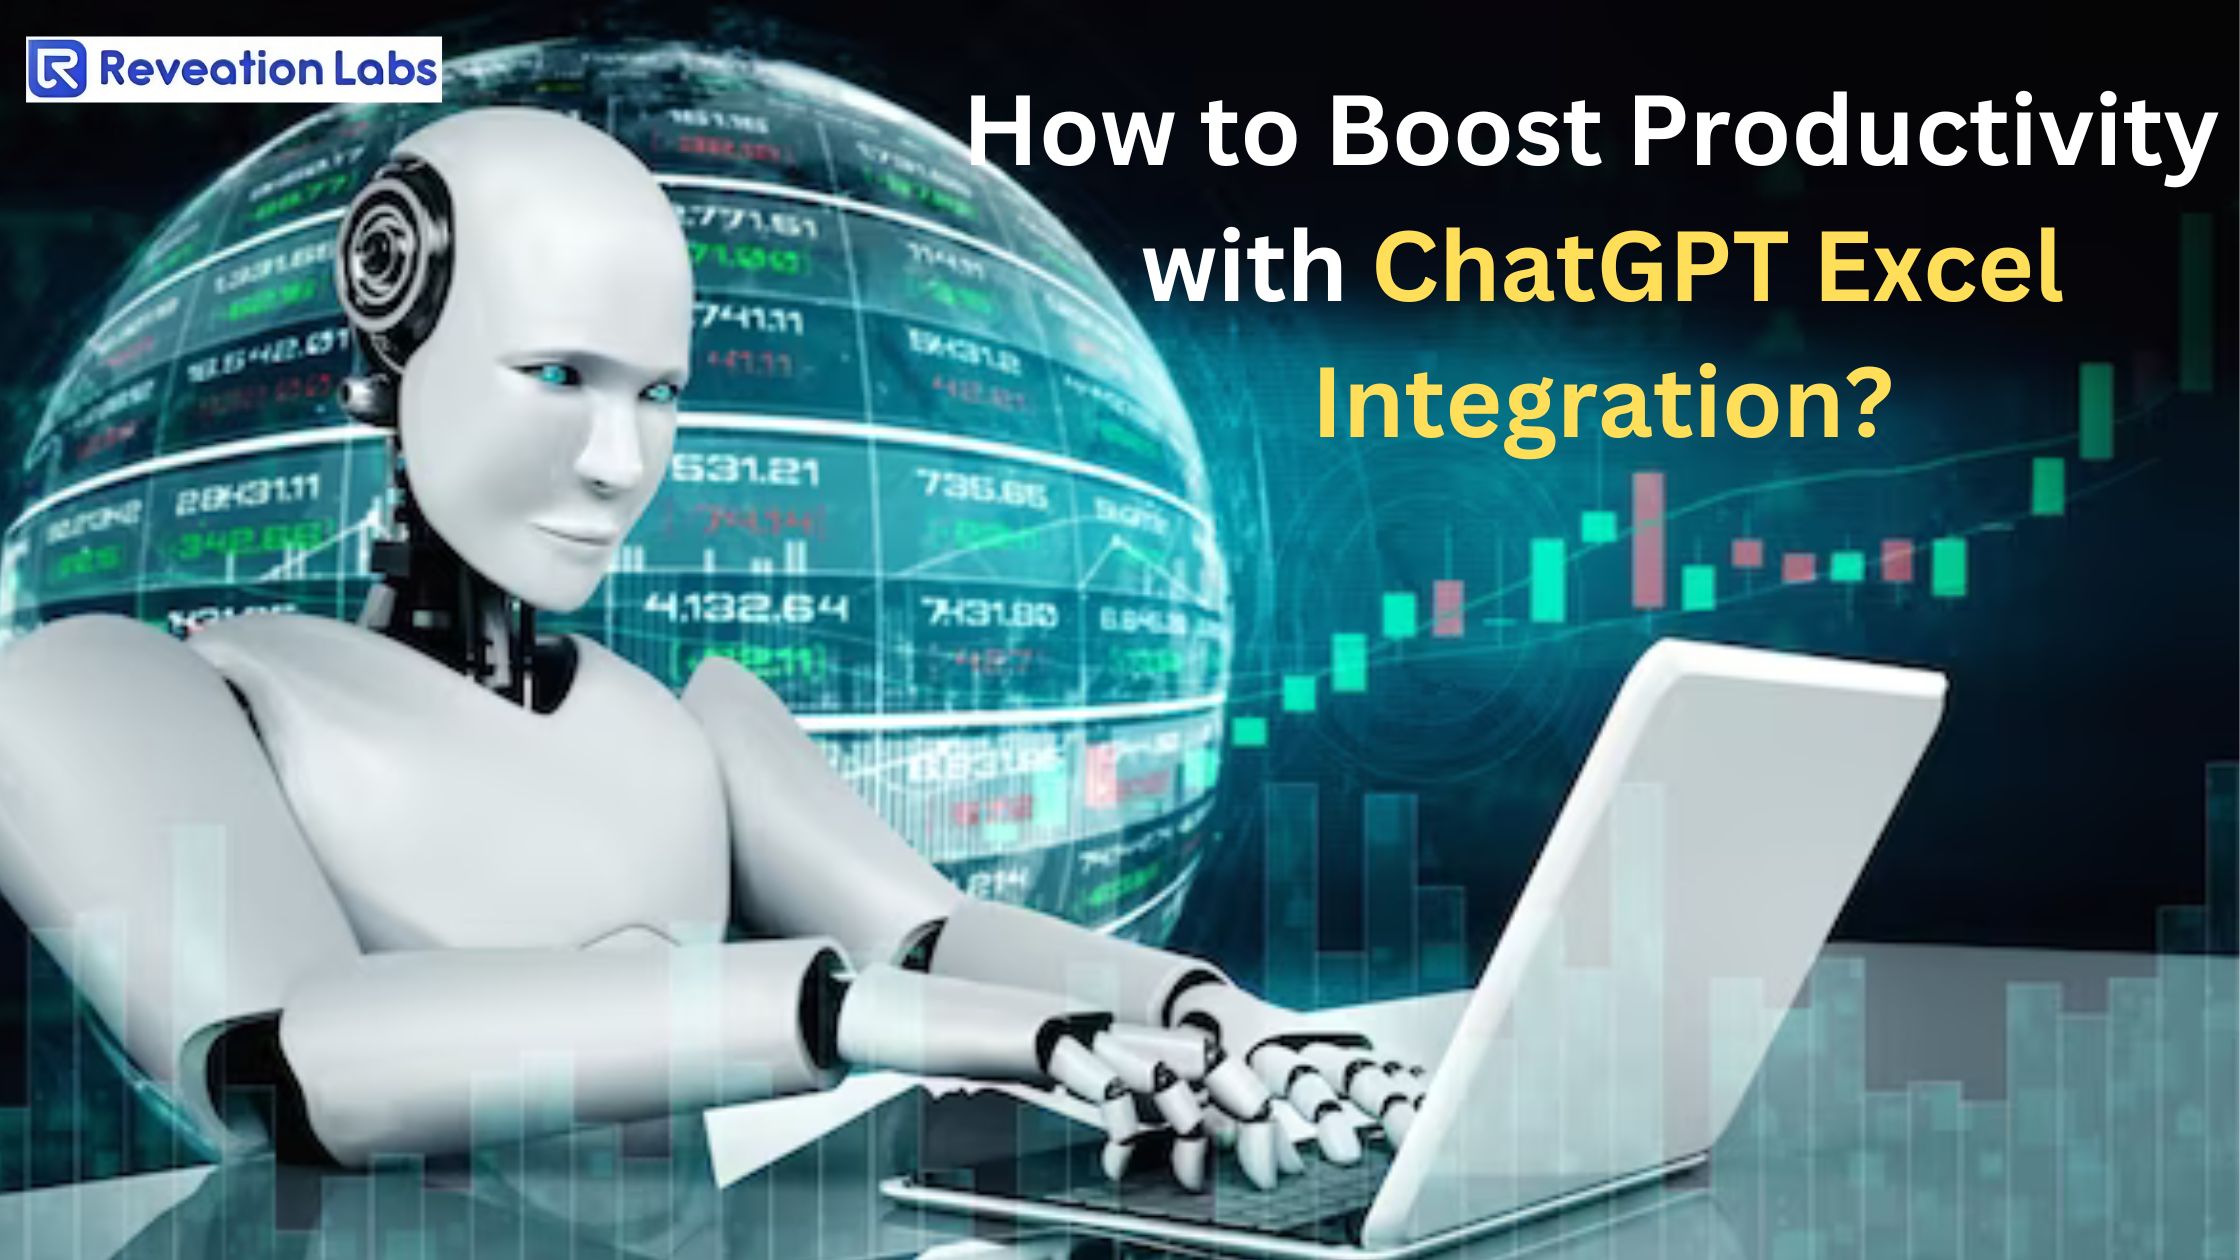 How to Boost Productivity with ChatGPT Excel Integration